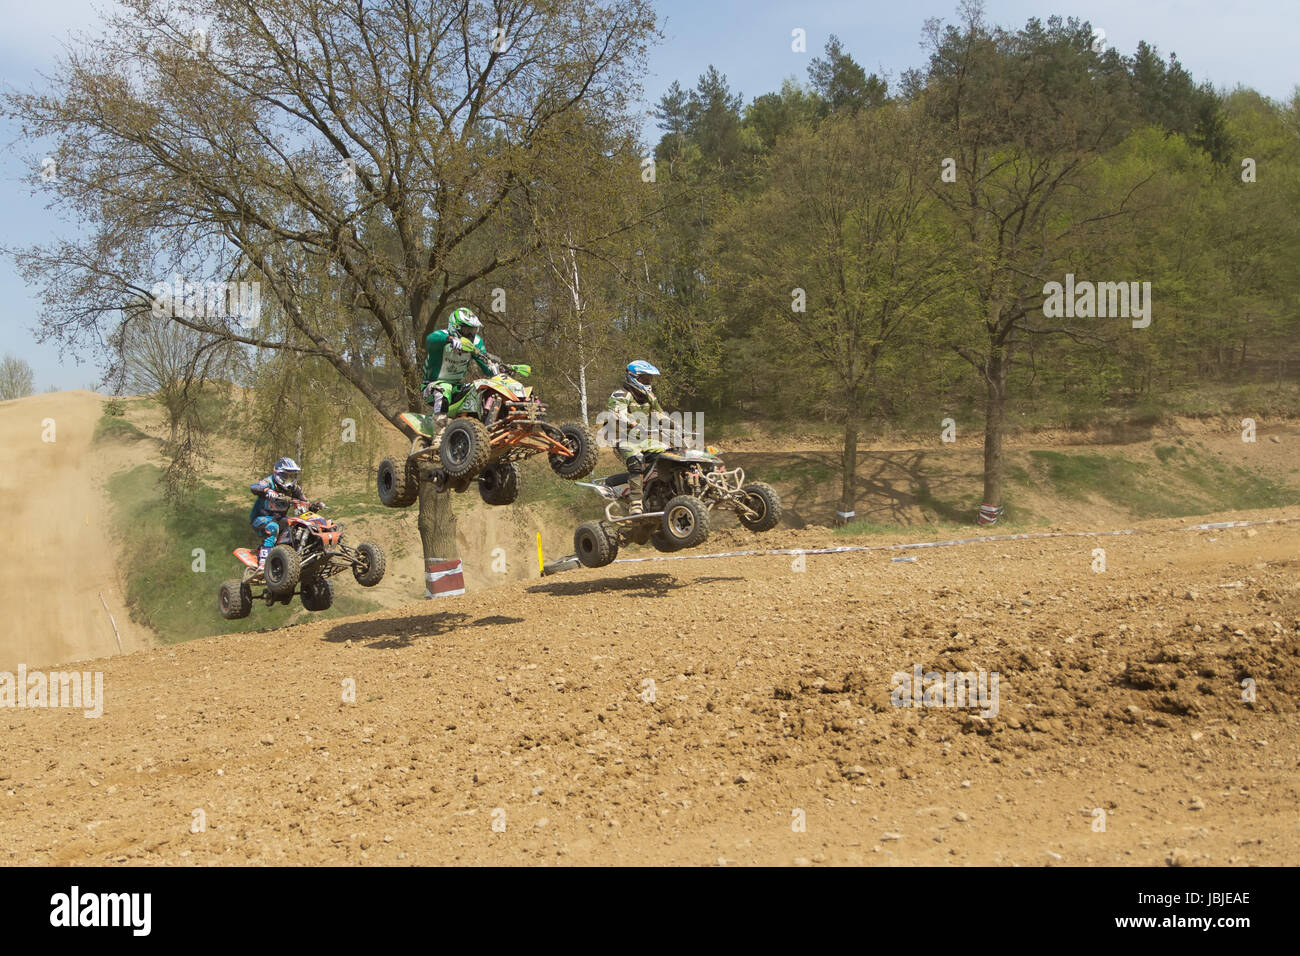 MOHELNICE,  CZECH REPUBLIC - APRIL 19: Trinity of quad riders are jumping a quad motorbike in the "International Championship of the Czech Republic 2014" on April 19, 2014  in MOHELNICE, Czech Republic. Stock Photo